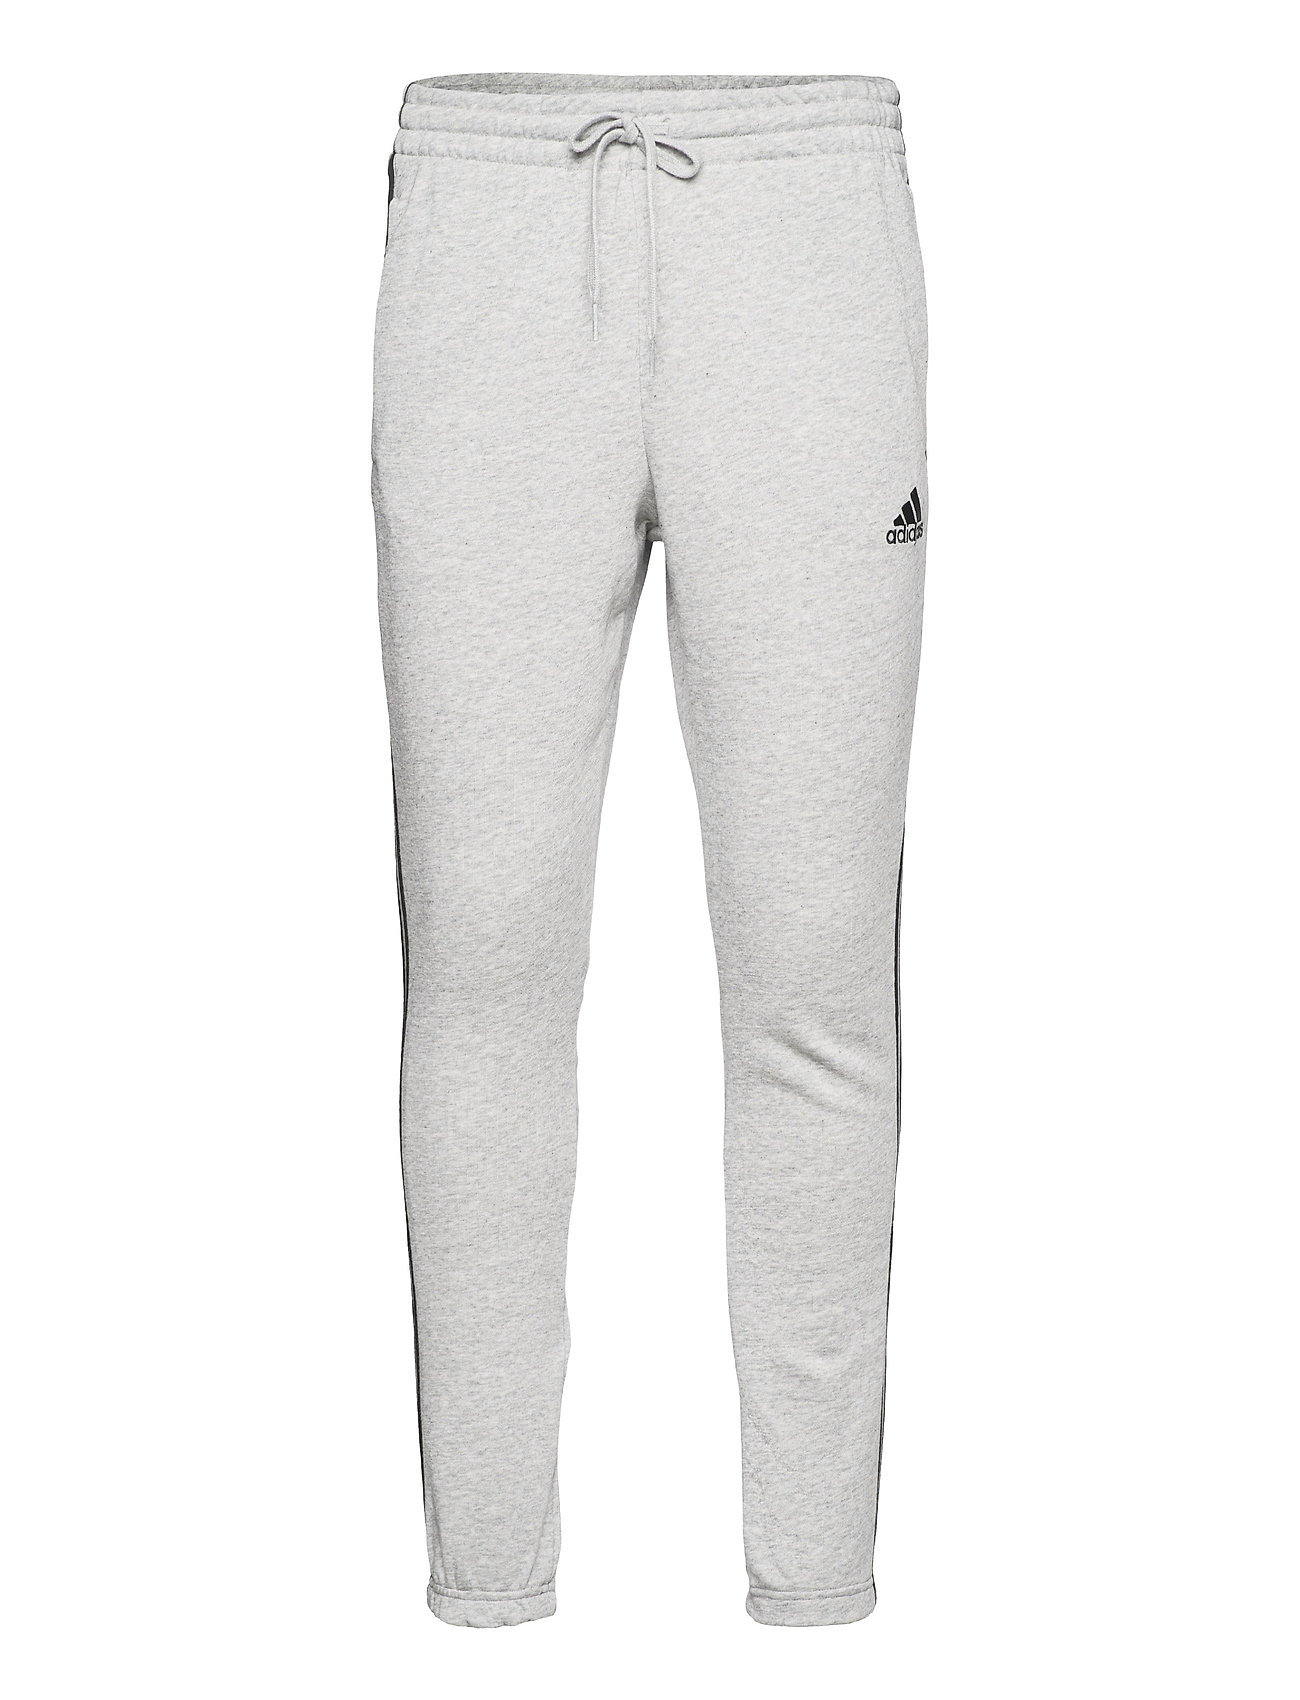 Essentials French Terry Tapered 3-Stripes Pants Collegehousut Olohousut Harmaa Adidas Performance, adidas Performance